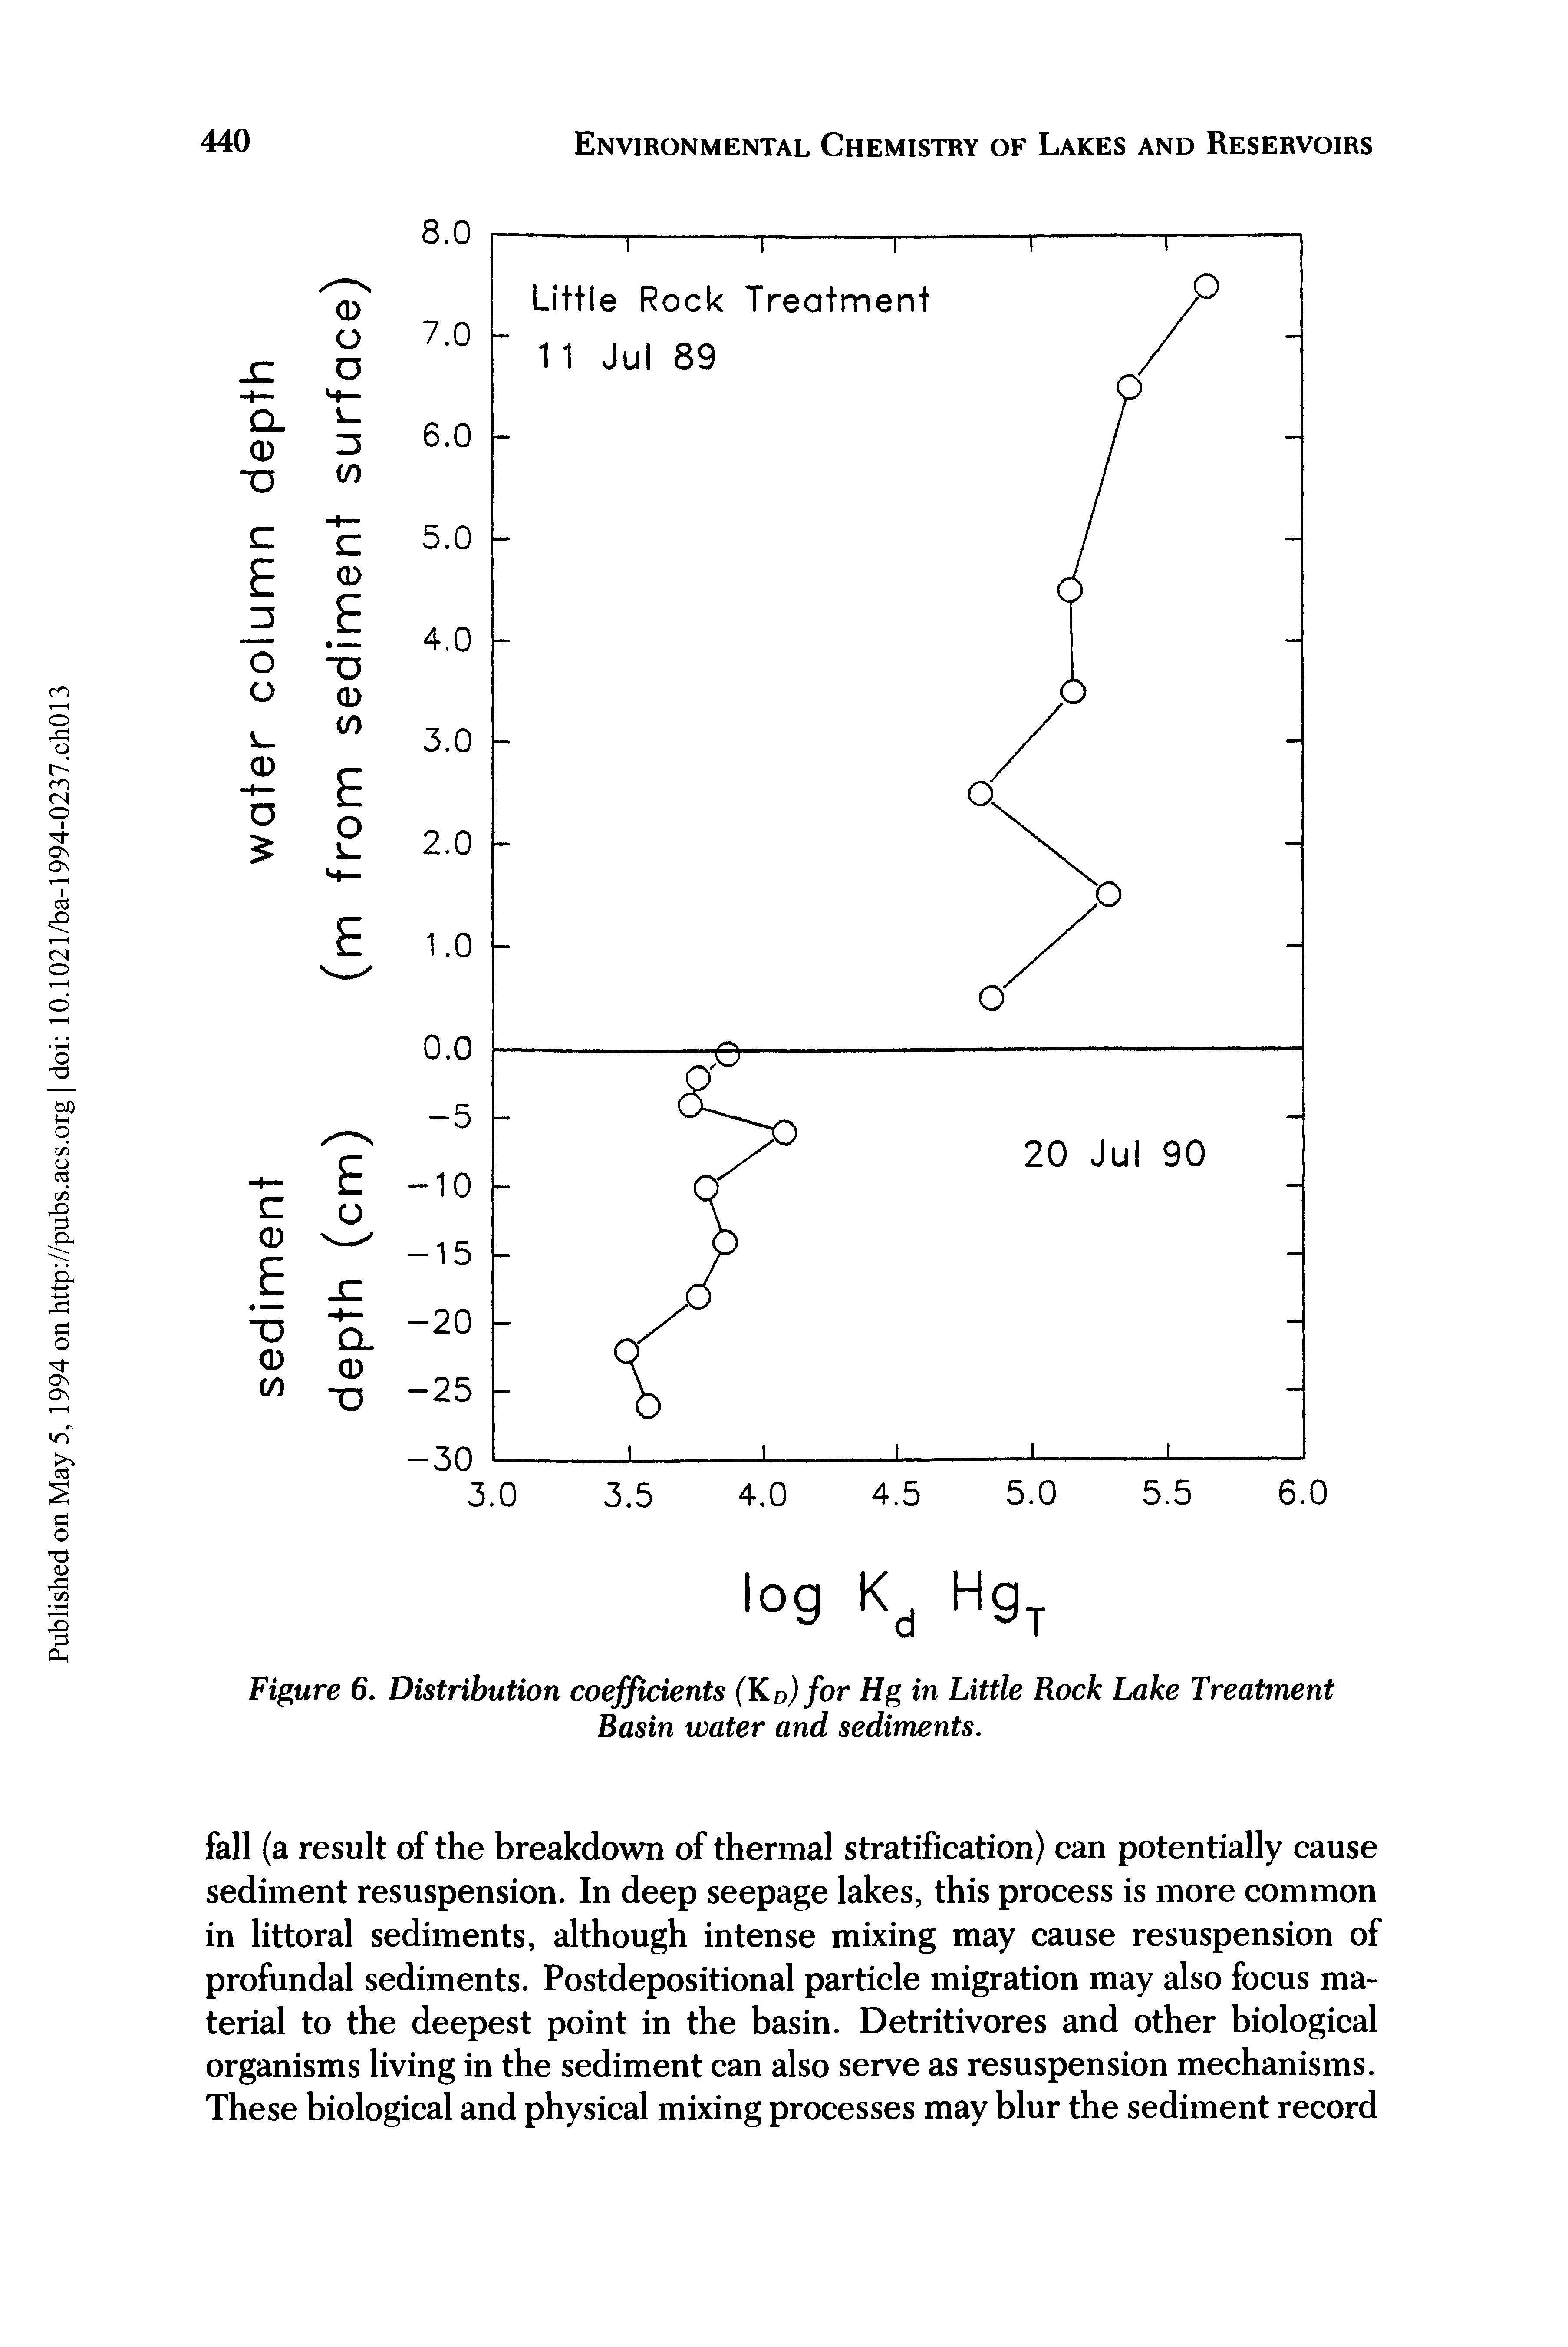 Figure 6. Distribution coefficients (K d) for Hg in Little Rock Lake Treatment Basin water and sediments.